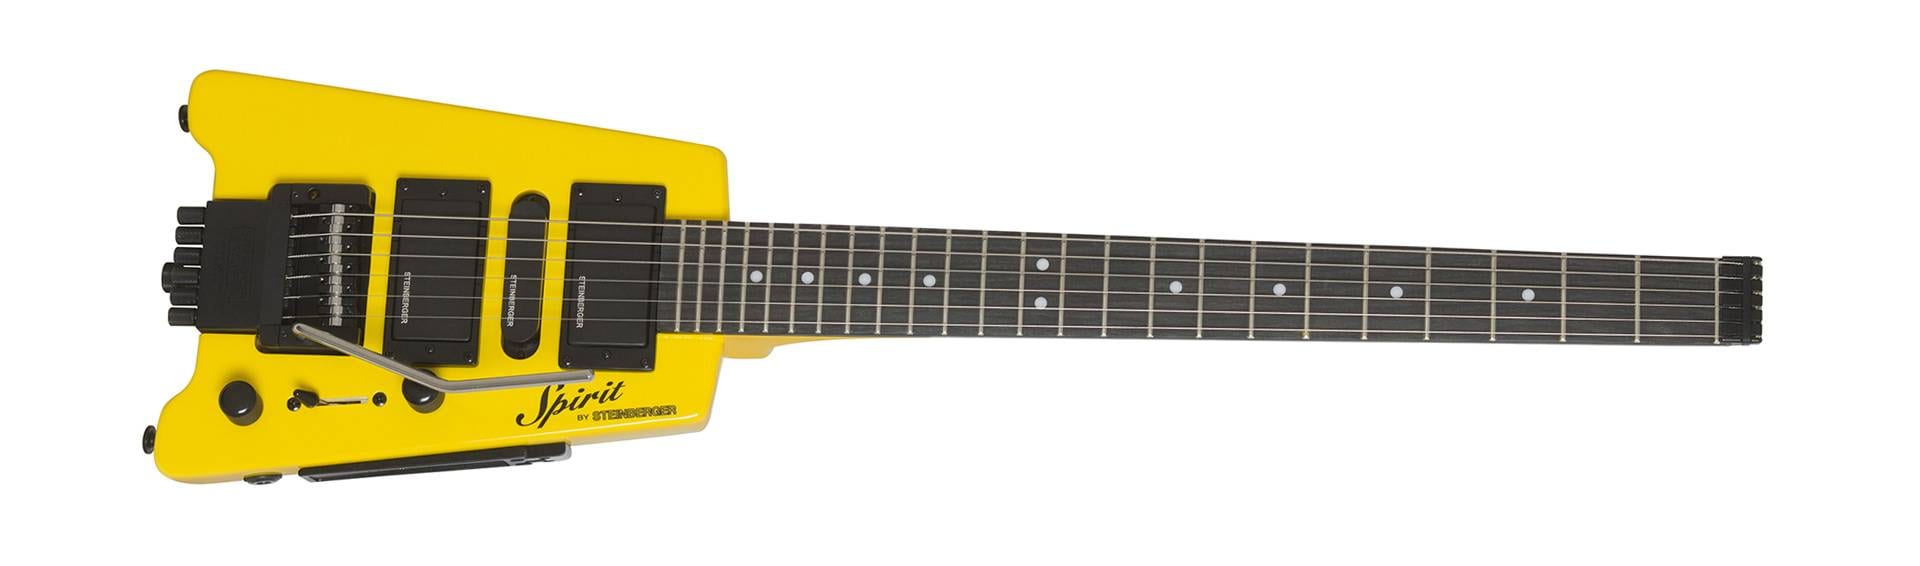 GT Pro Deluxe in Hot Rod Yellow